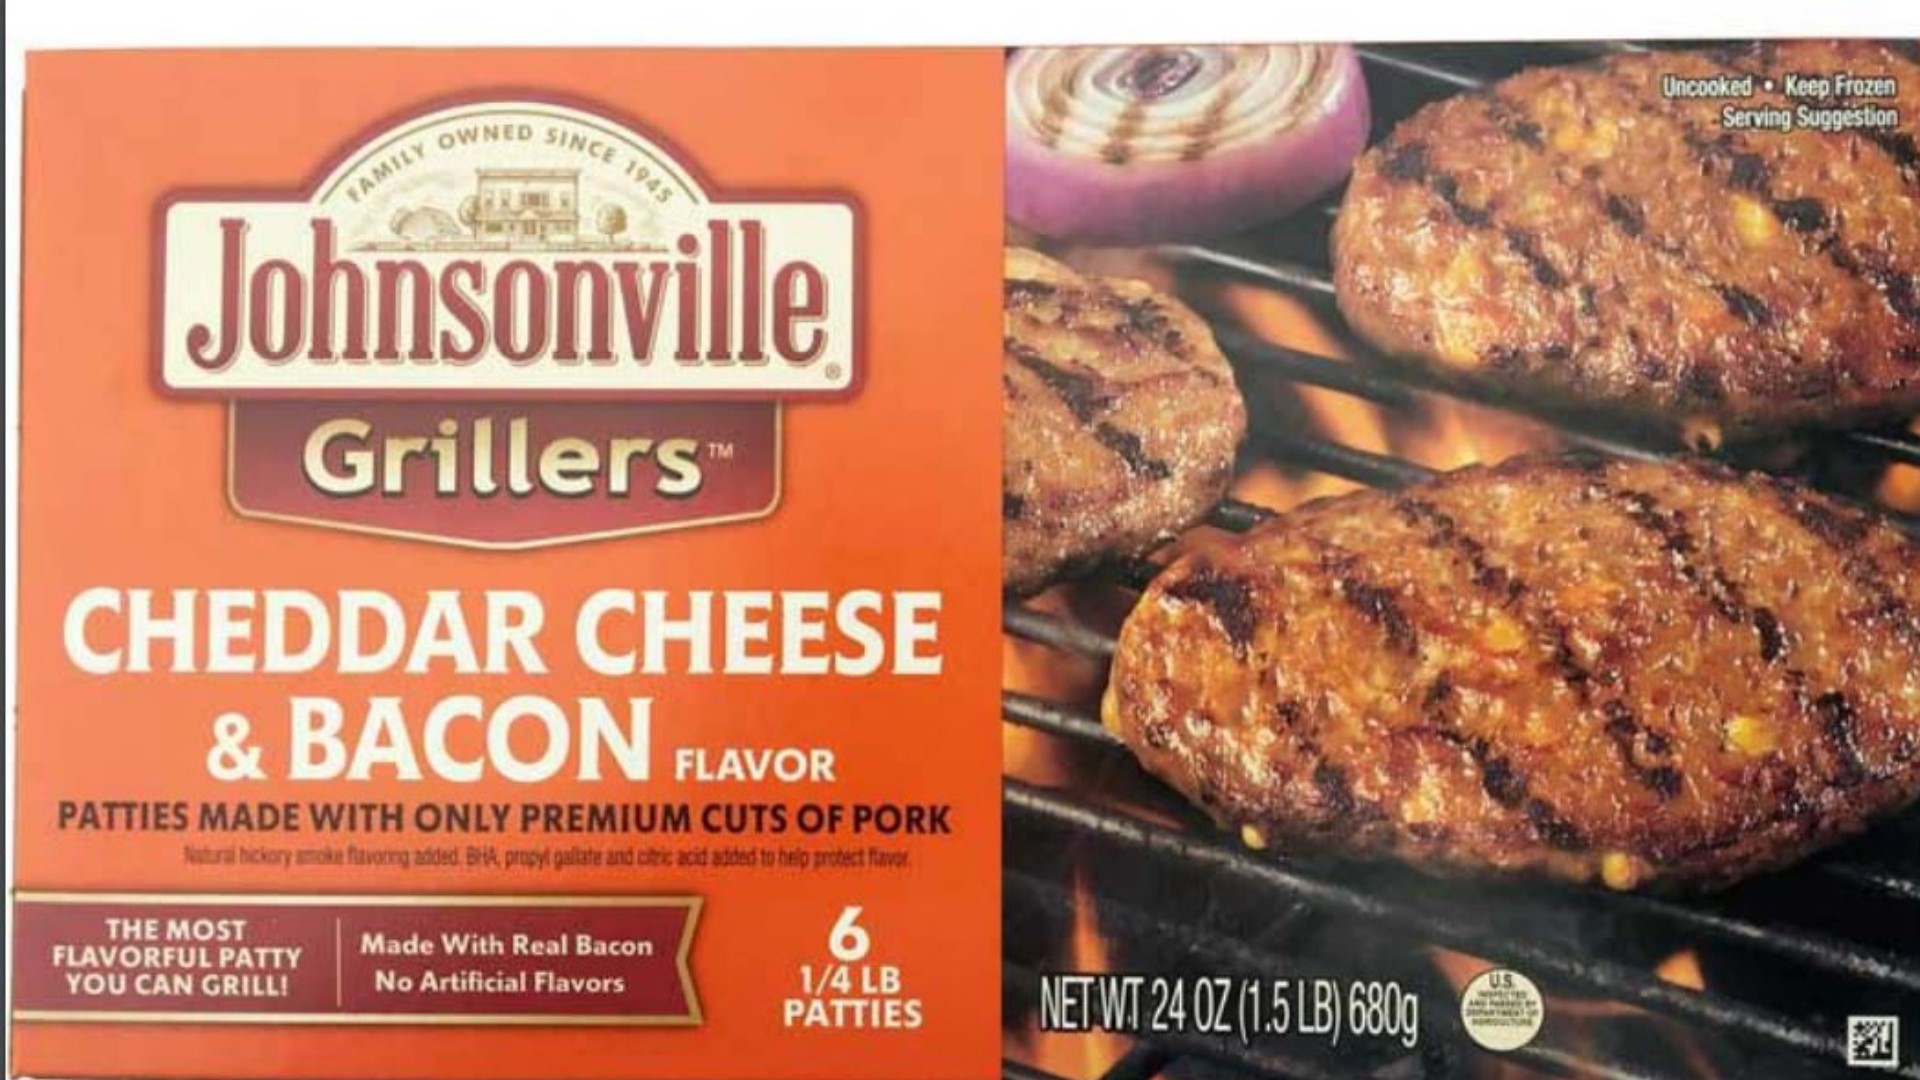 Before you go, there are 6 things you should know. Here's one: Multiple frozen food products have been recalled.